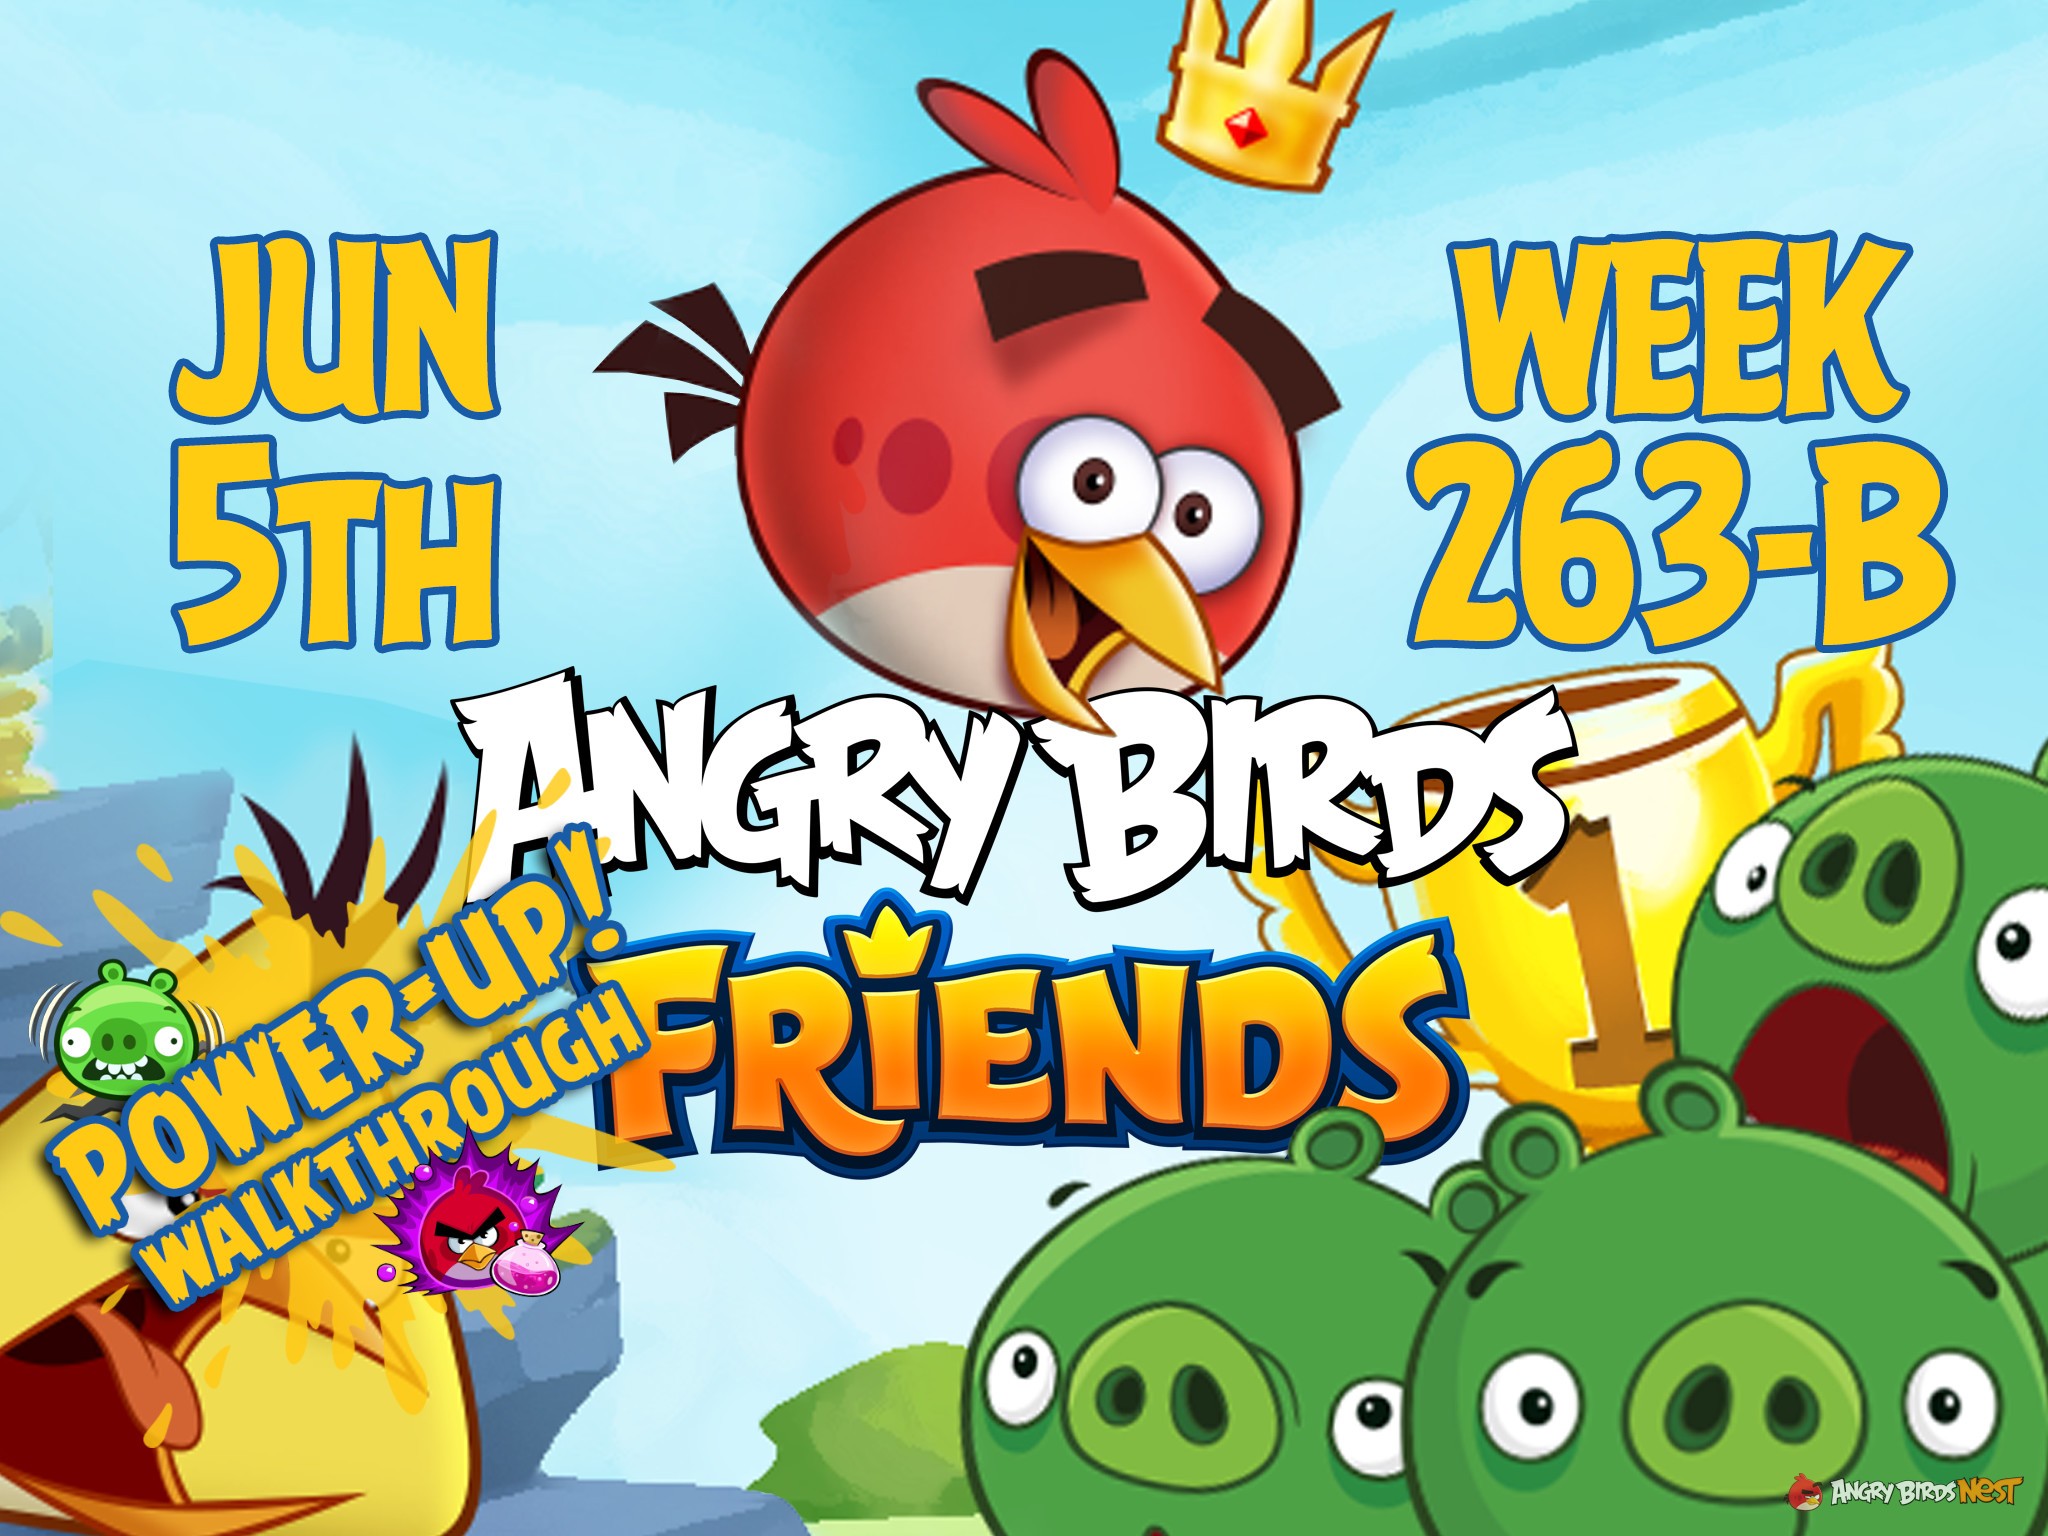 Angry Birds Friends Tournament Week 263-B Feature Image PU